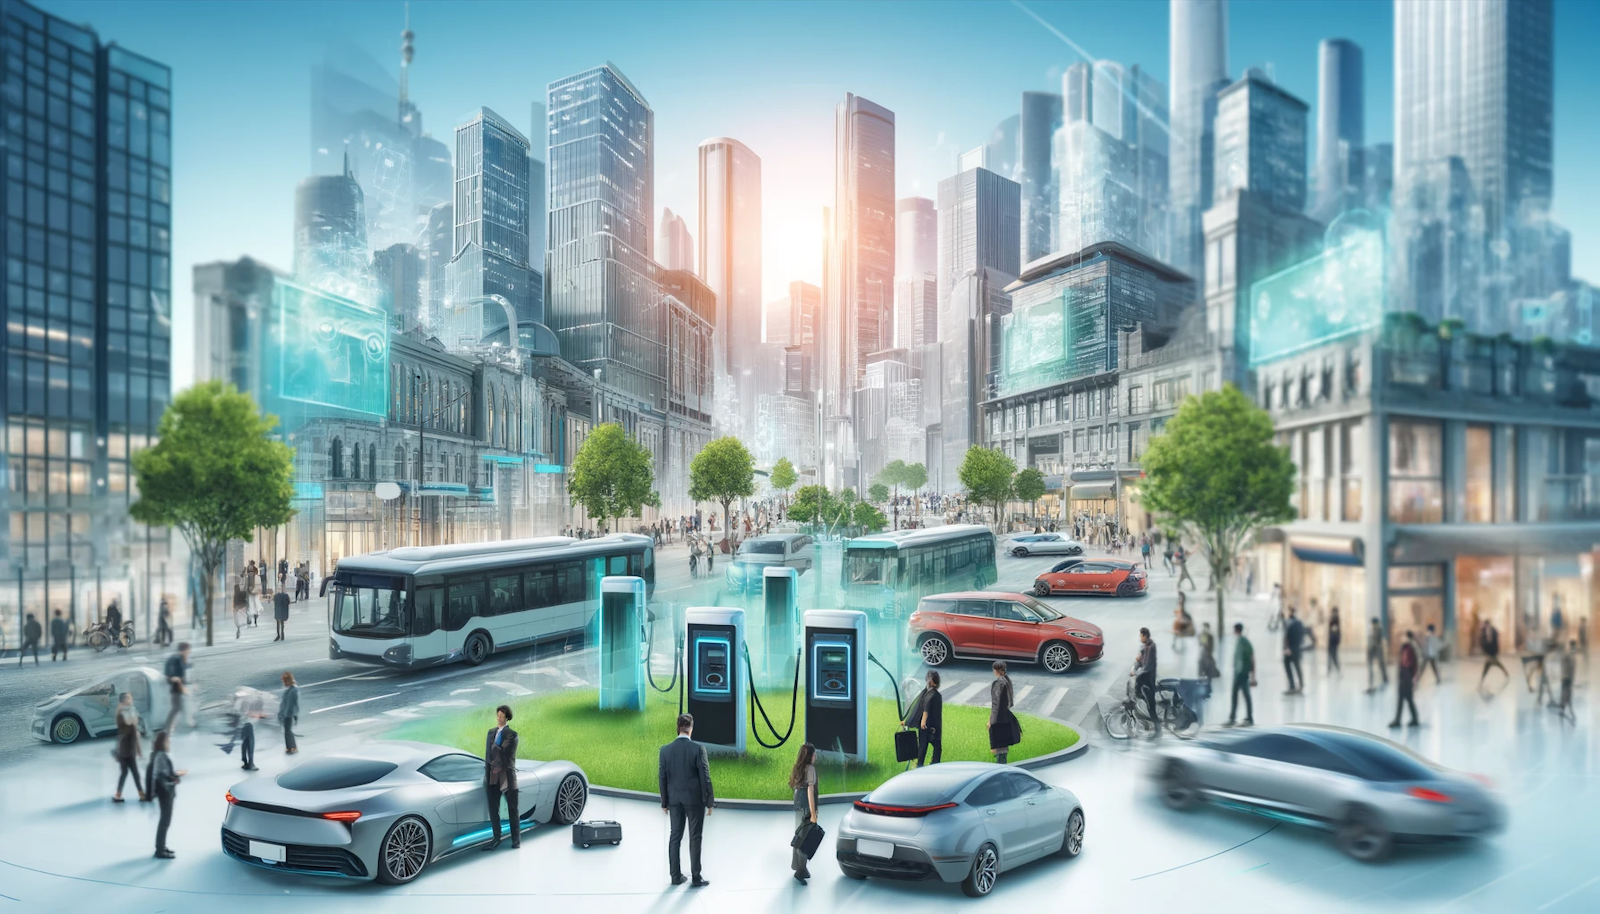 Futuristic cityscape featuring electric vehicles and integrated charging stations in a vibrant urban setting, emphasizing sustainability and electric mobility.